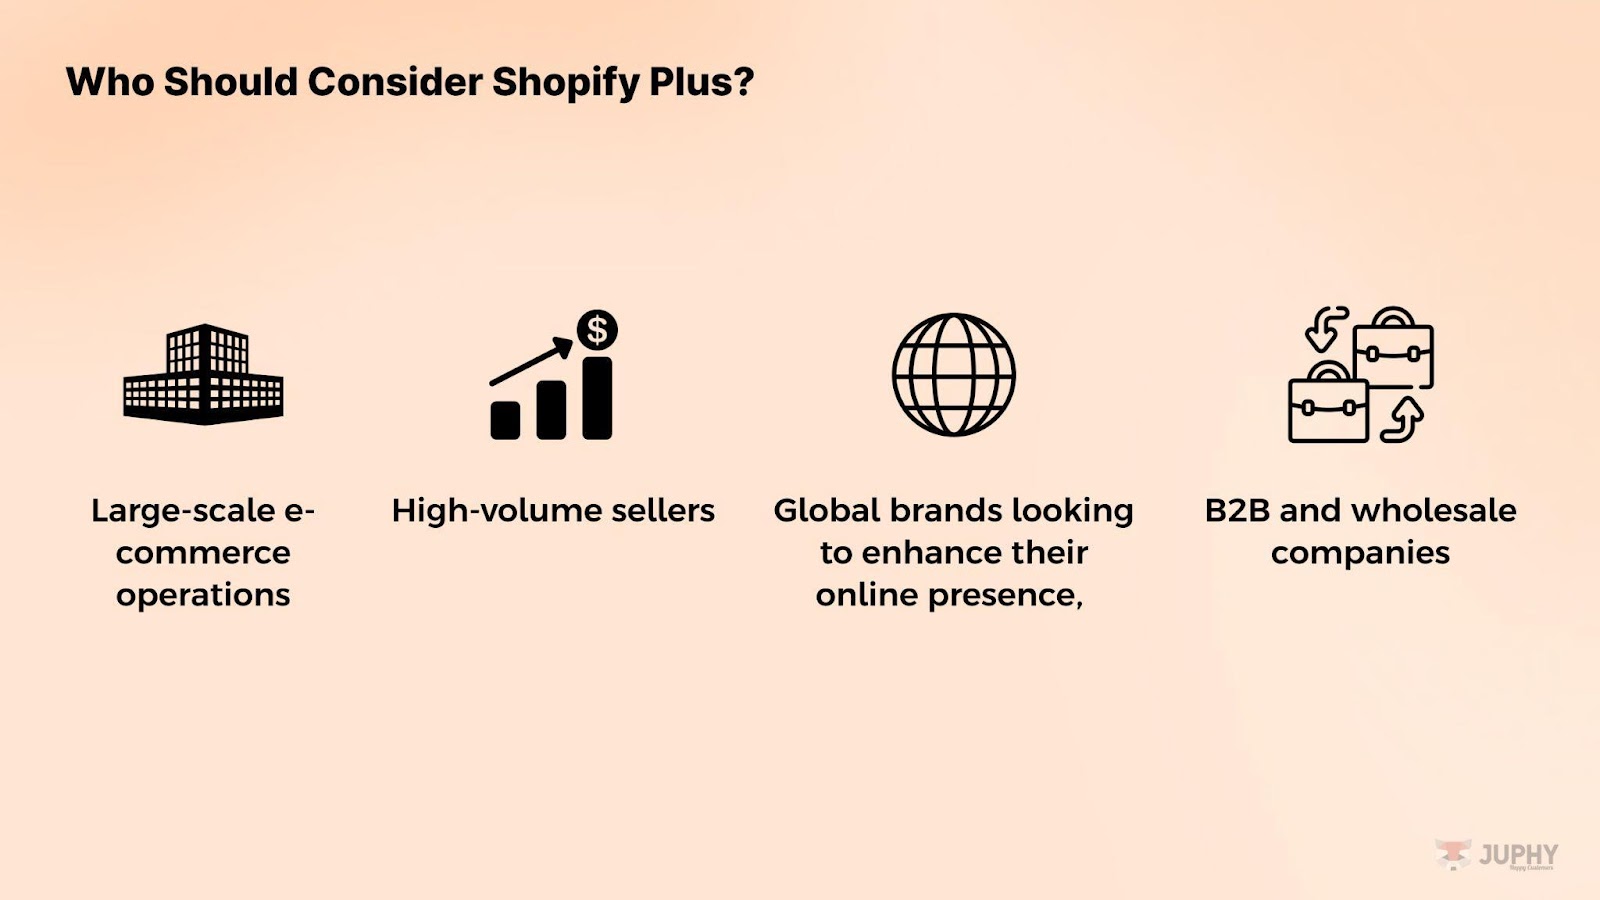 Who should consider Shopify Plus?